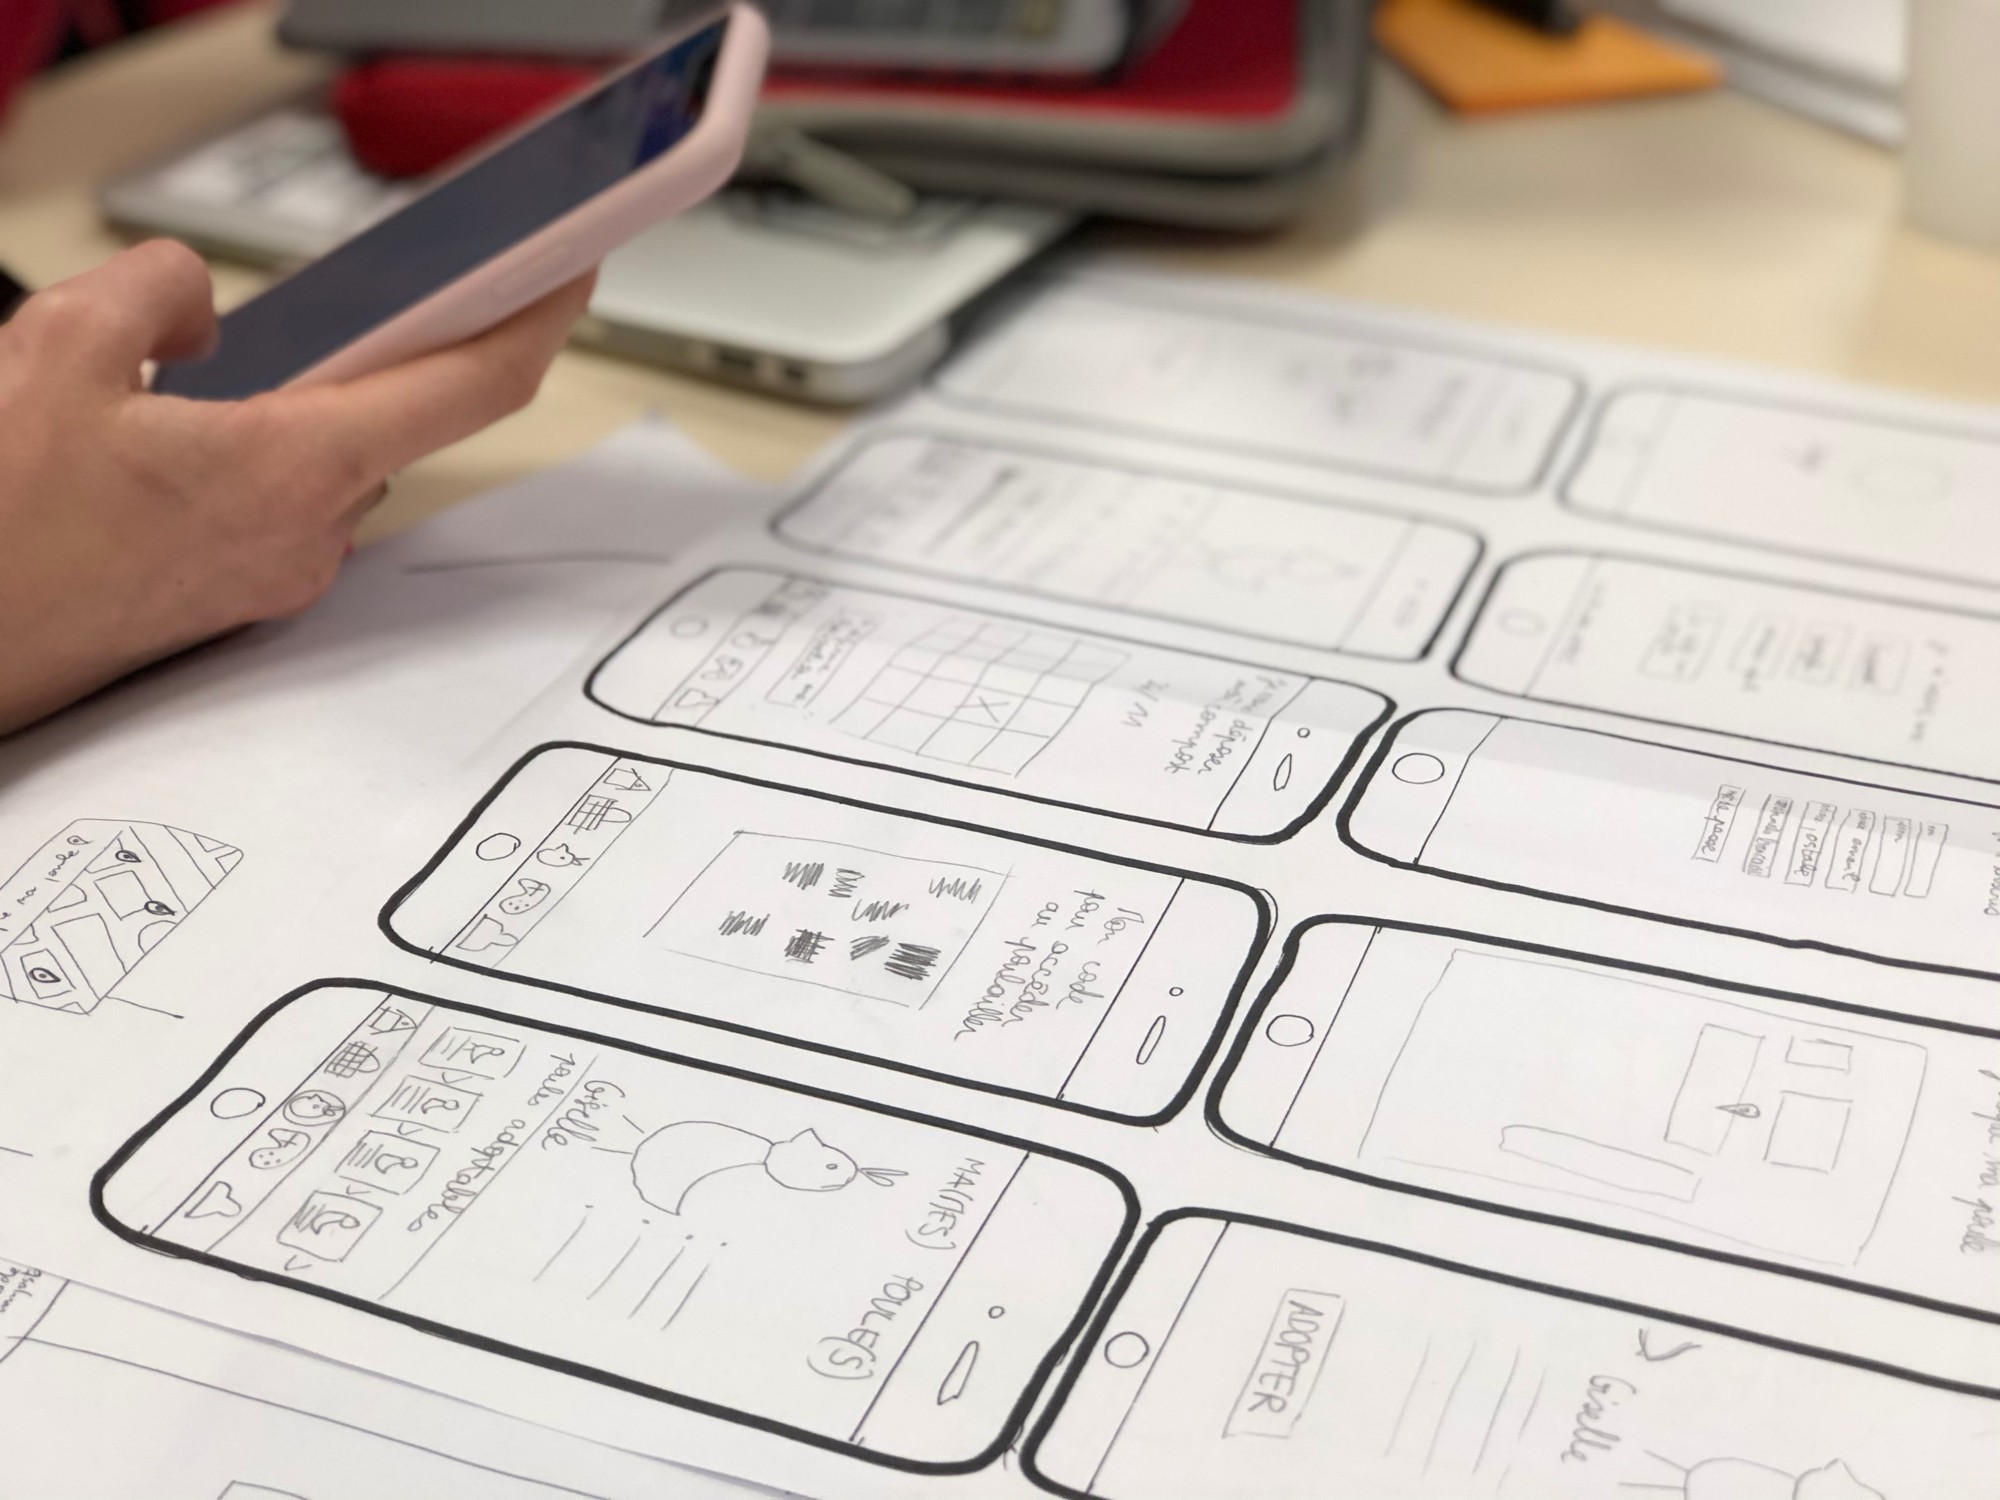 Designing mobile phone user interfaces using paper wireframes, and extentive paper prototypes.